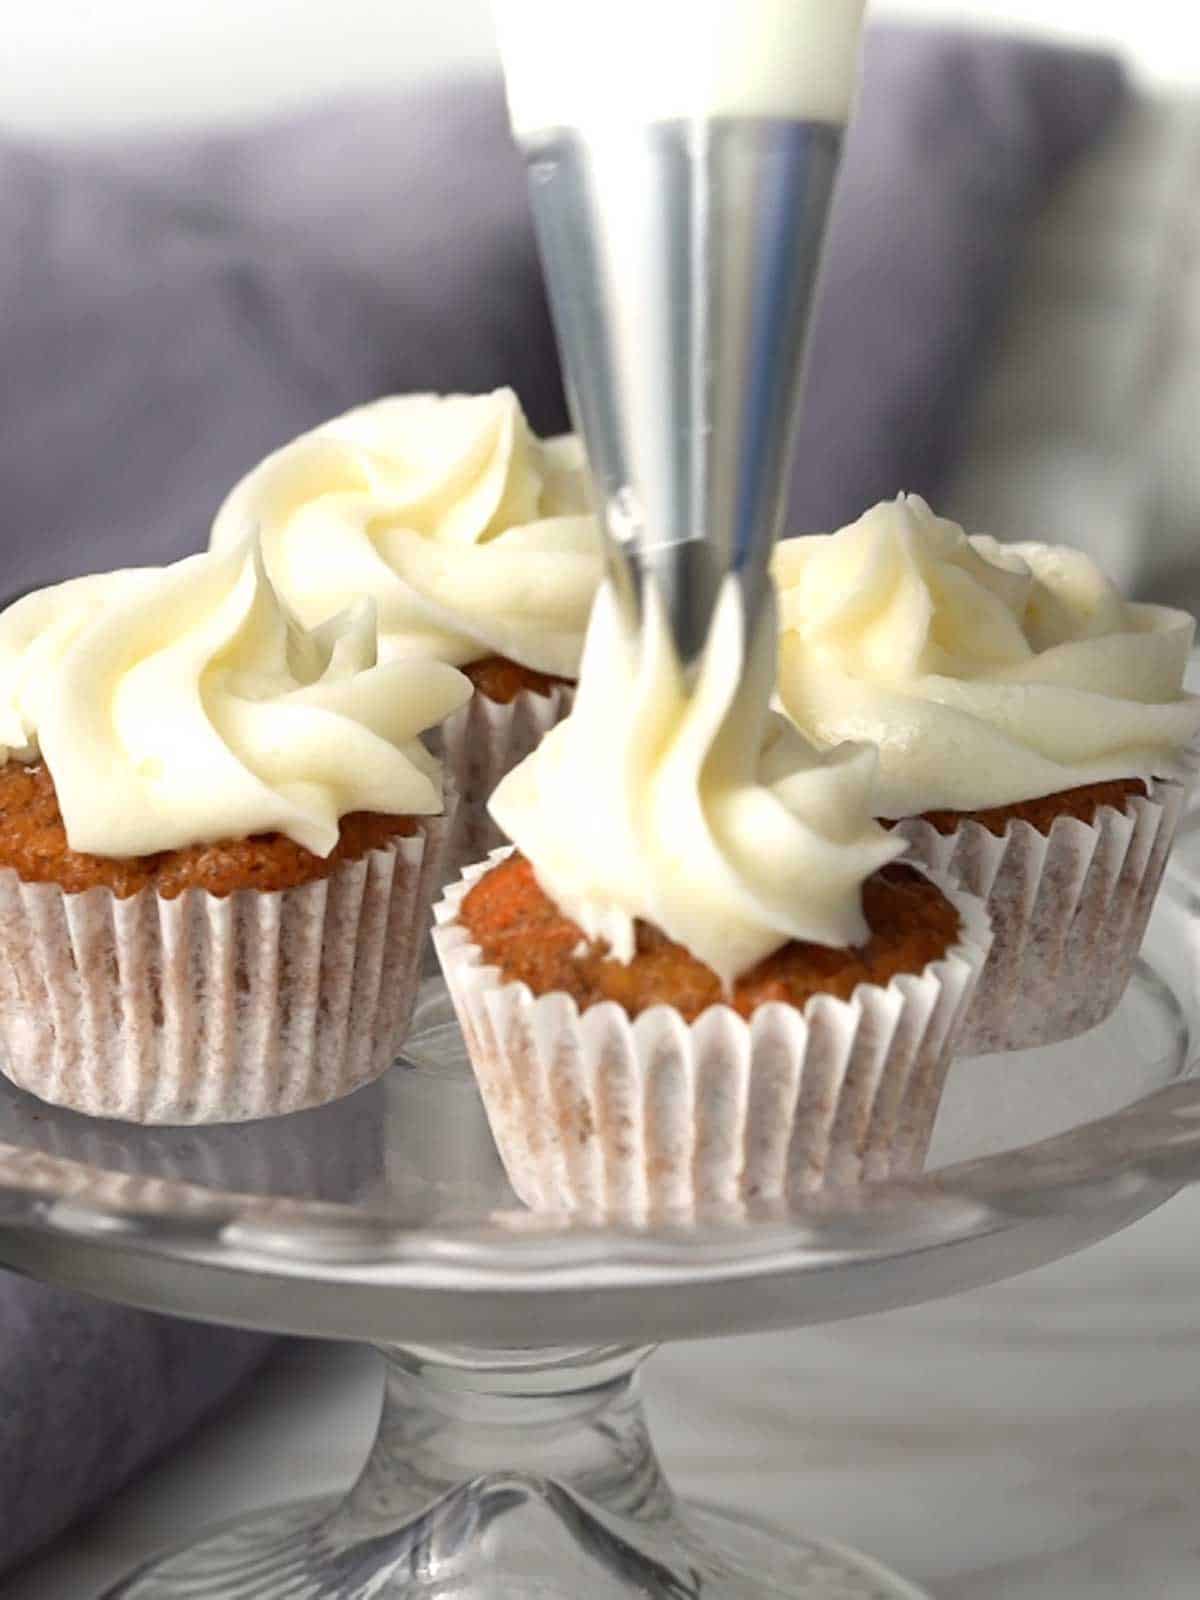 Frosting the mini-carrot cupcakes